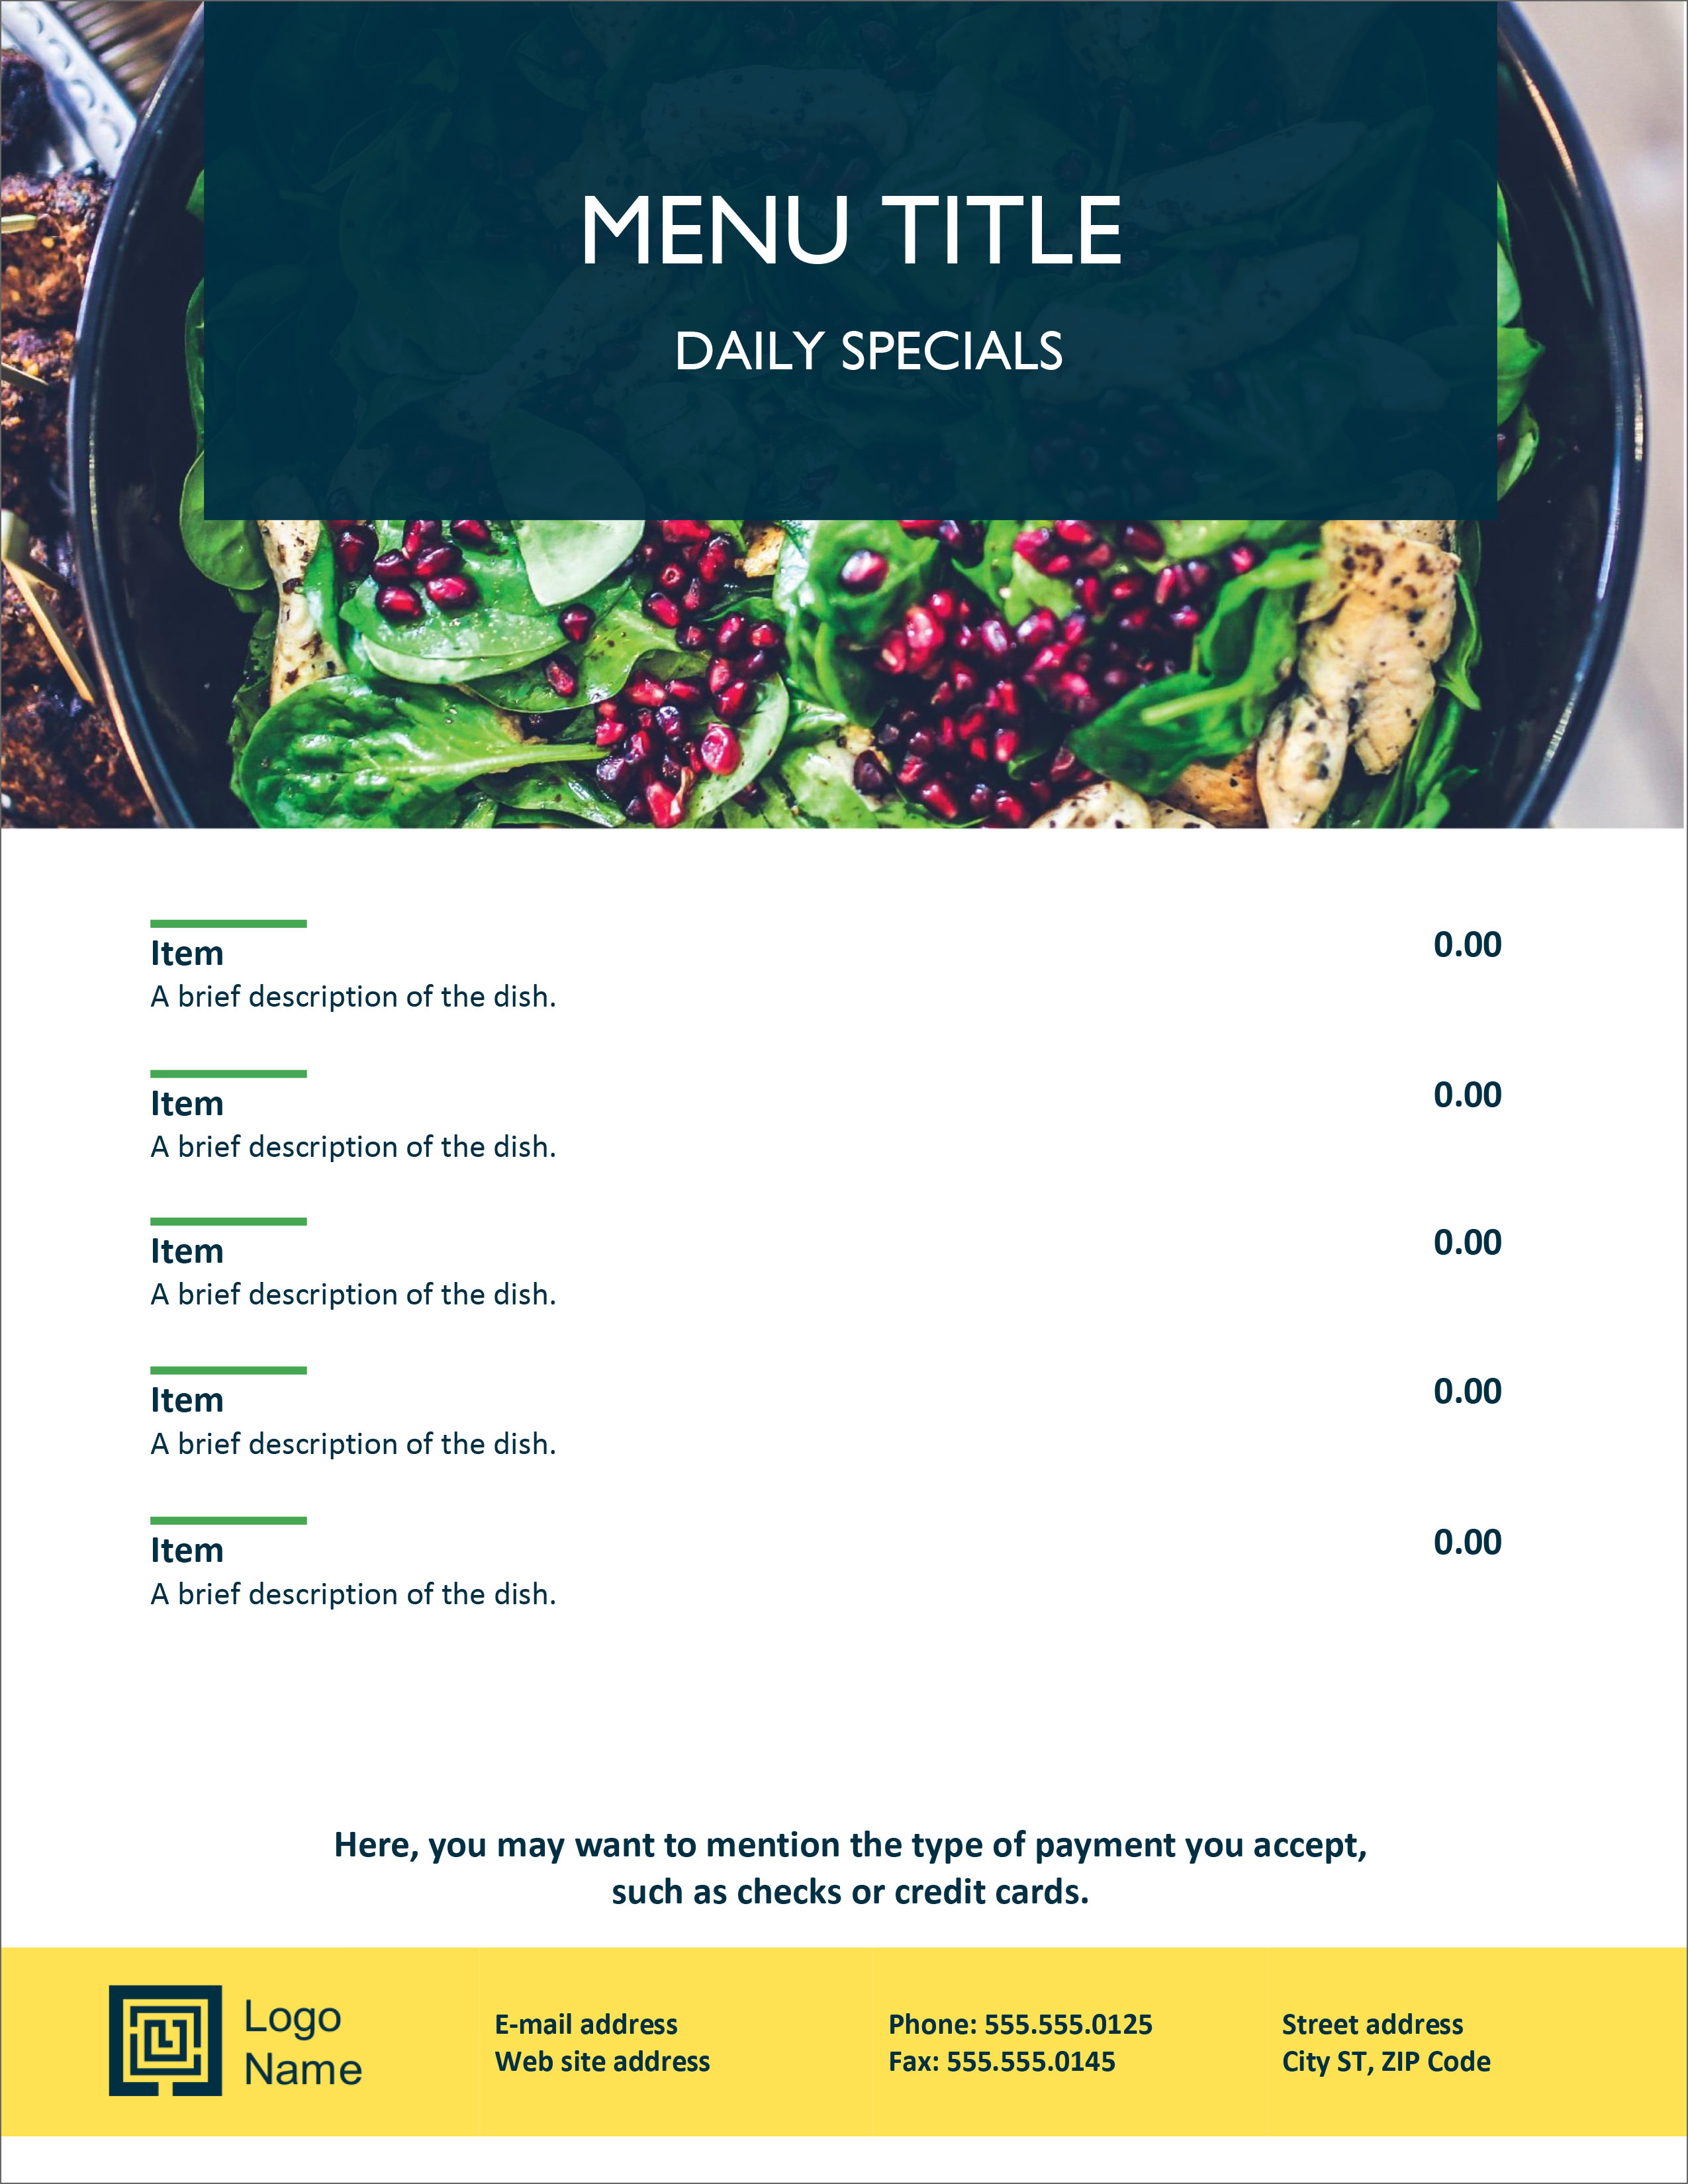 22 Free Simple Menu Templates For Restaurants, Cafes, And Parties Regarding Free Restaurant Menu Templates For Microsoft Word